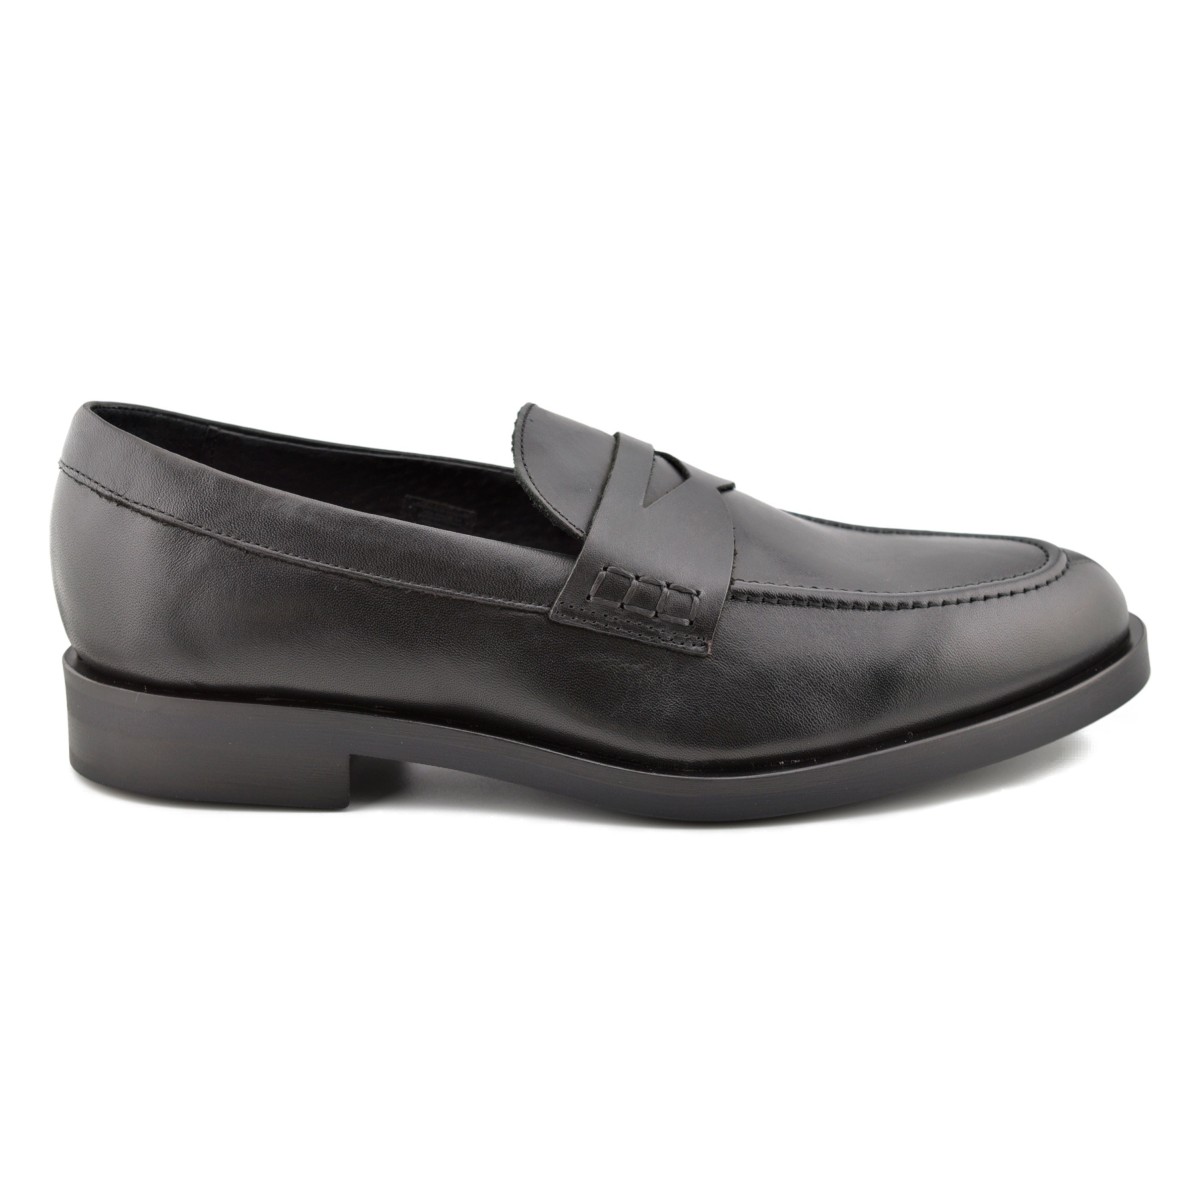 Black leather loafers by Casual